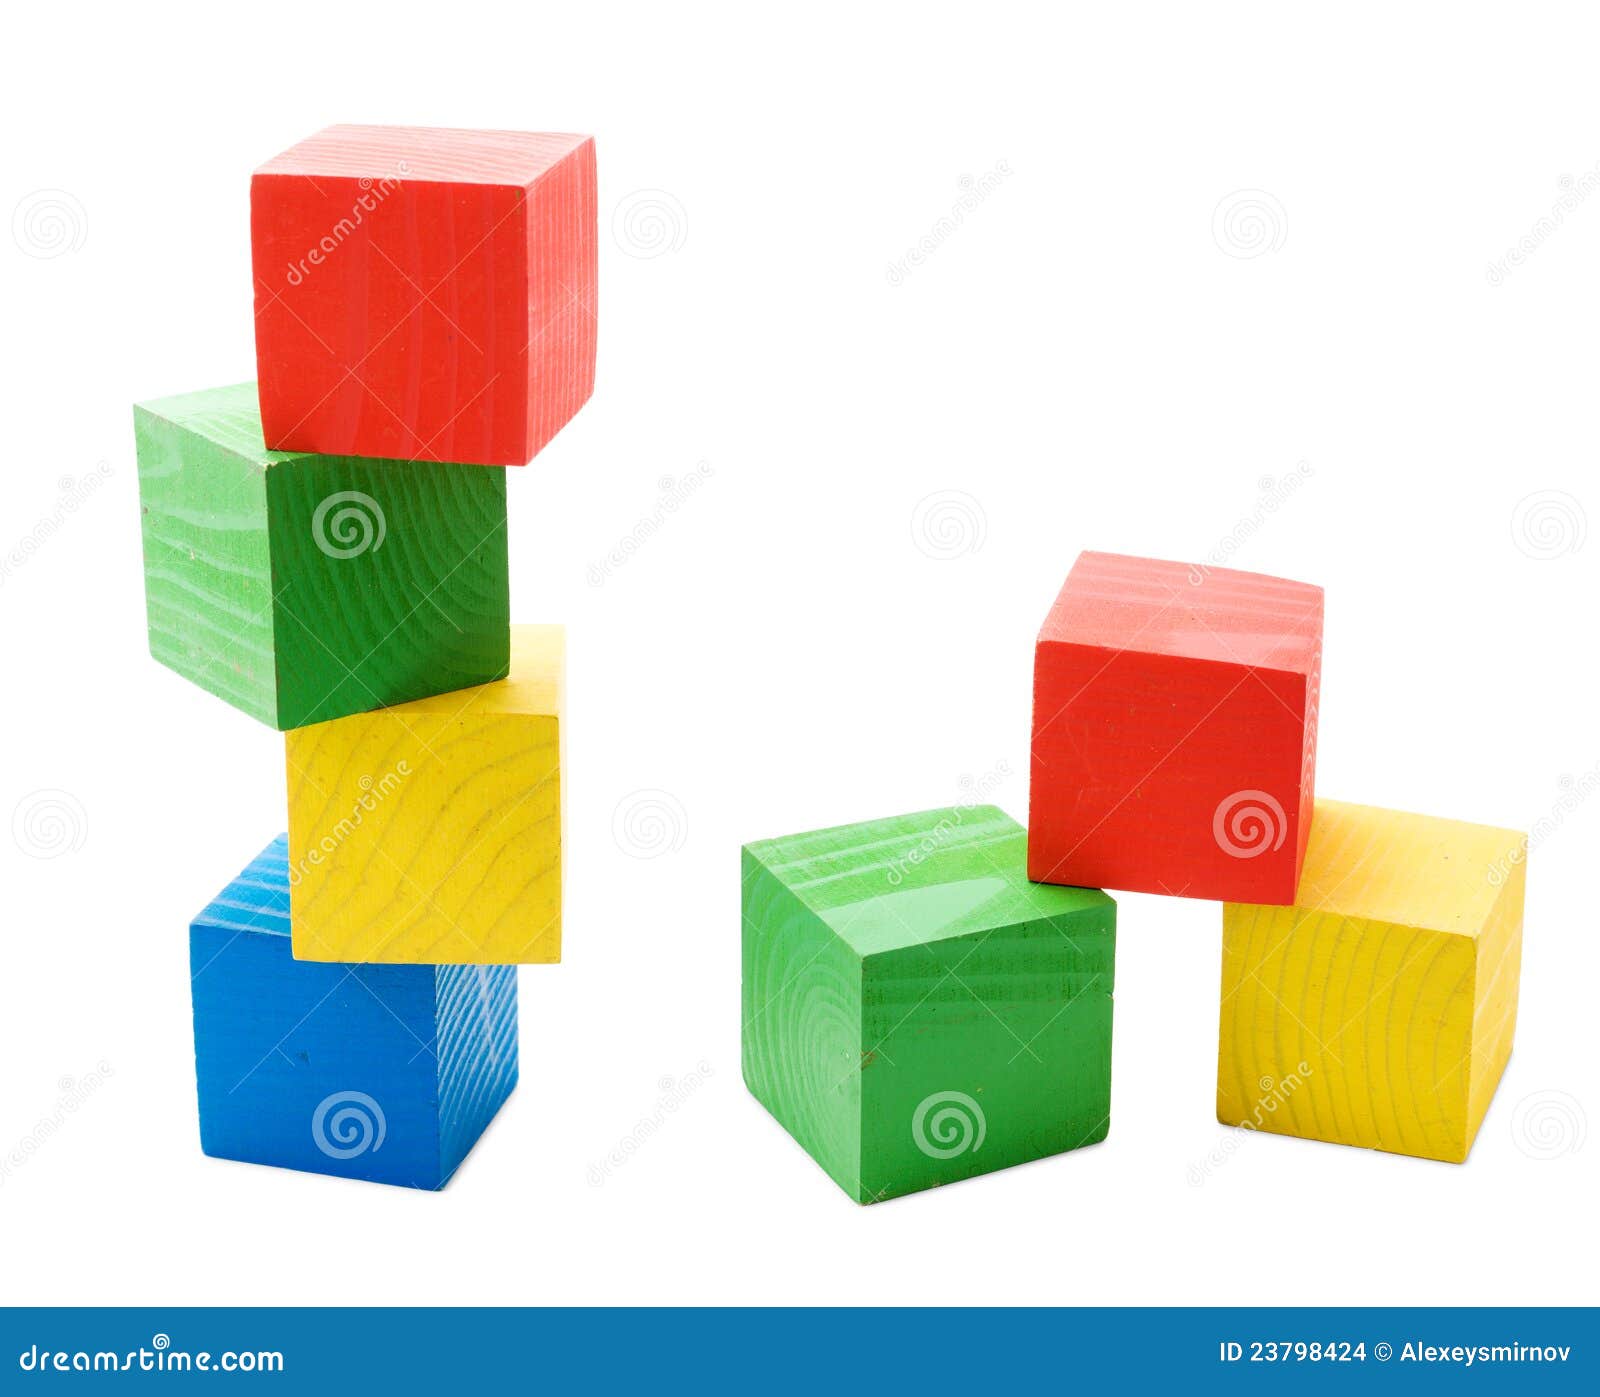 More similar stock images of ` Wooden colored cubes tower `